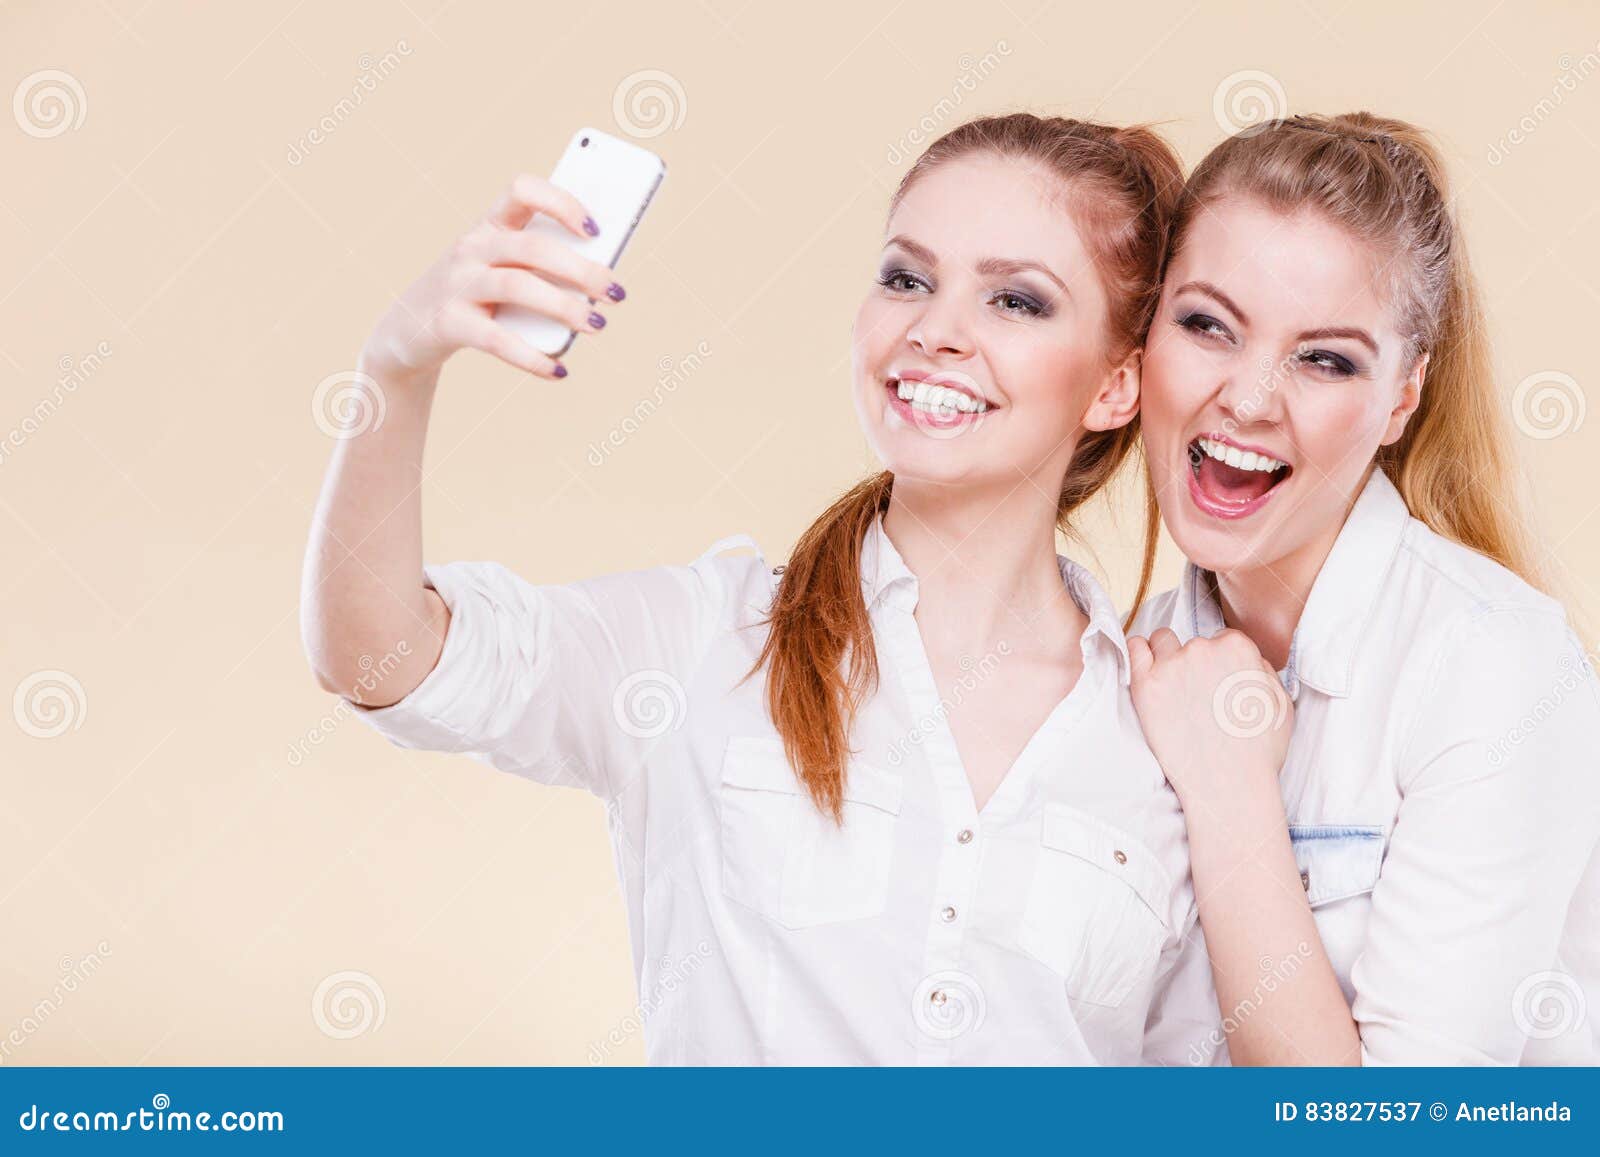 Friends Student Girls Taking Self Photo with Smart Phone Stock Image ...